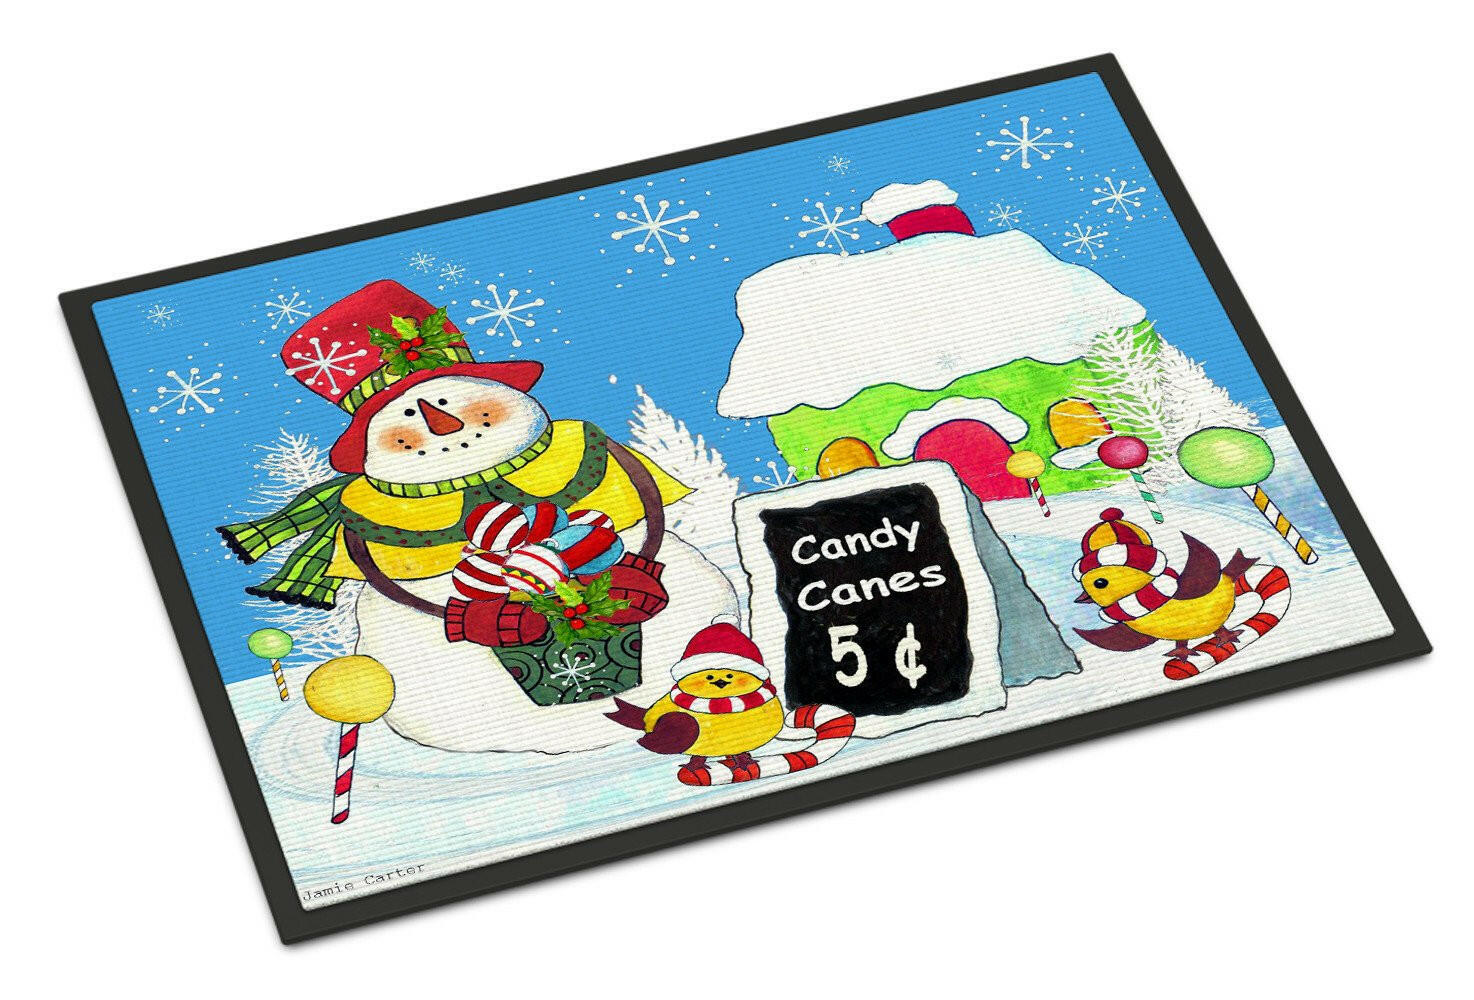 Candy Canes for Sale Snowman Indoor or Outdoor Mat 18x27 PJC1076MAT - the-store.com